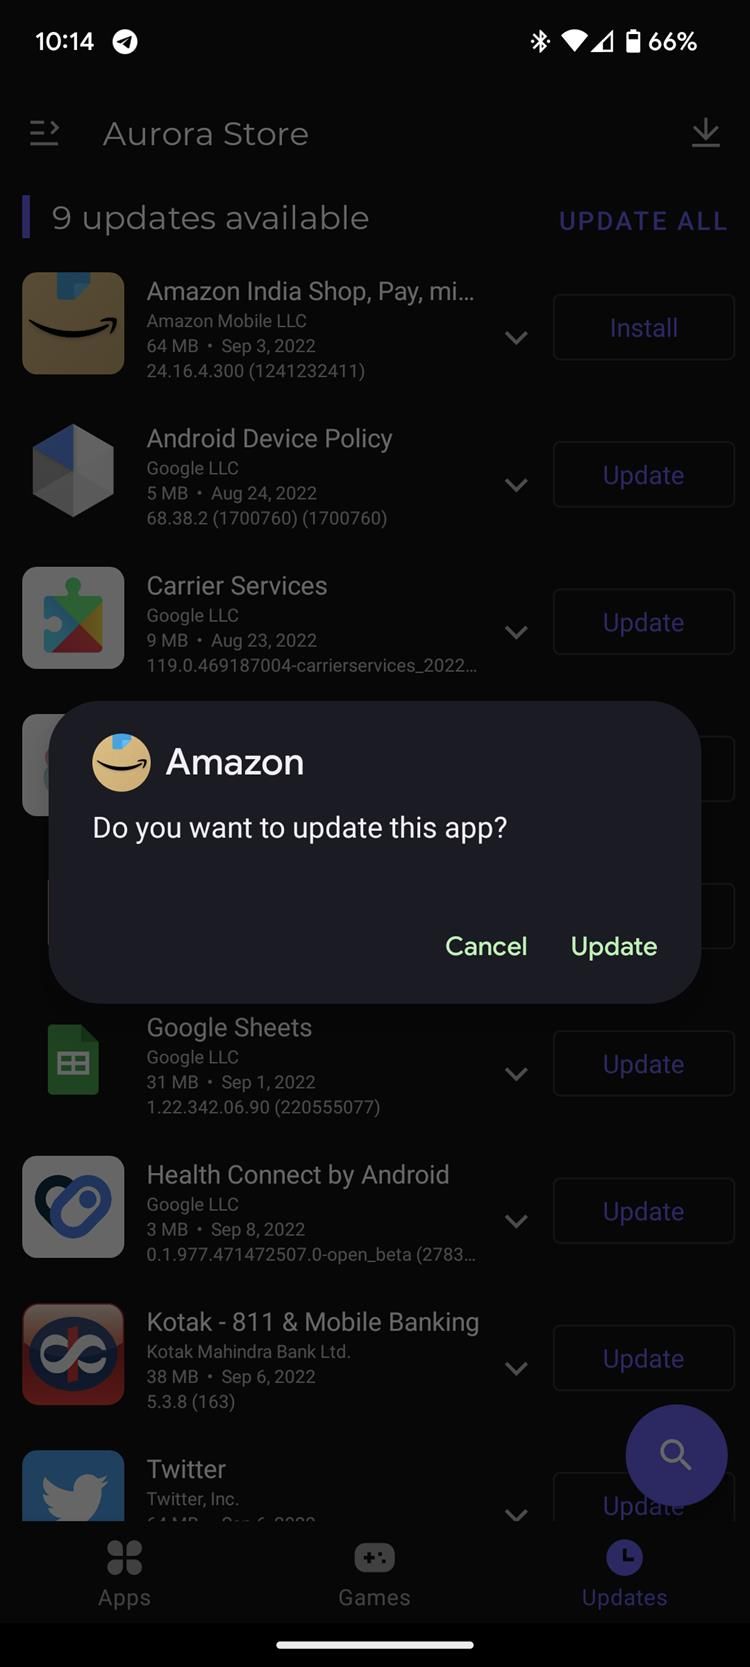 An update dialog box for the Amazon app in the Aurora Store app